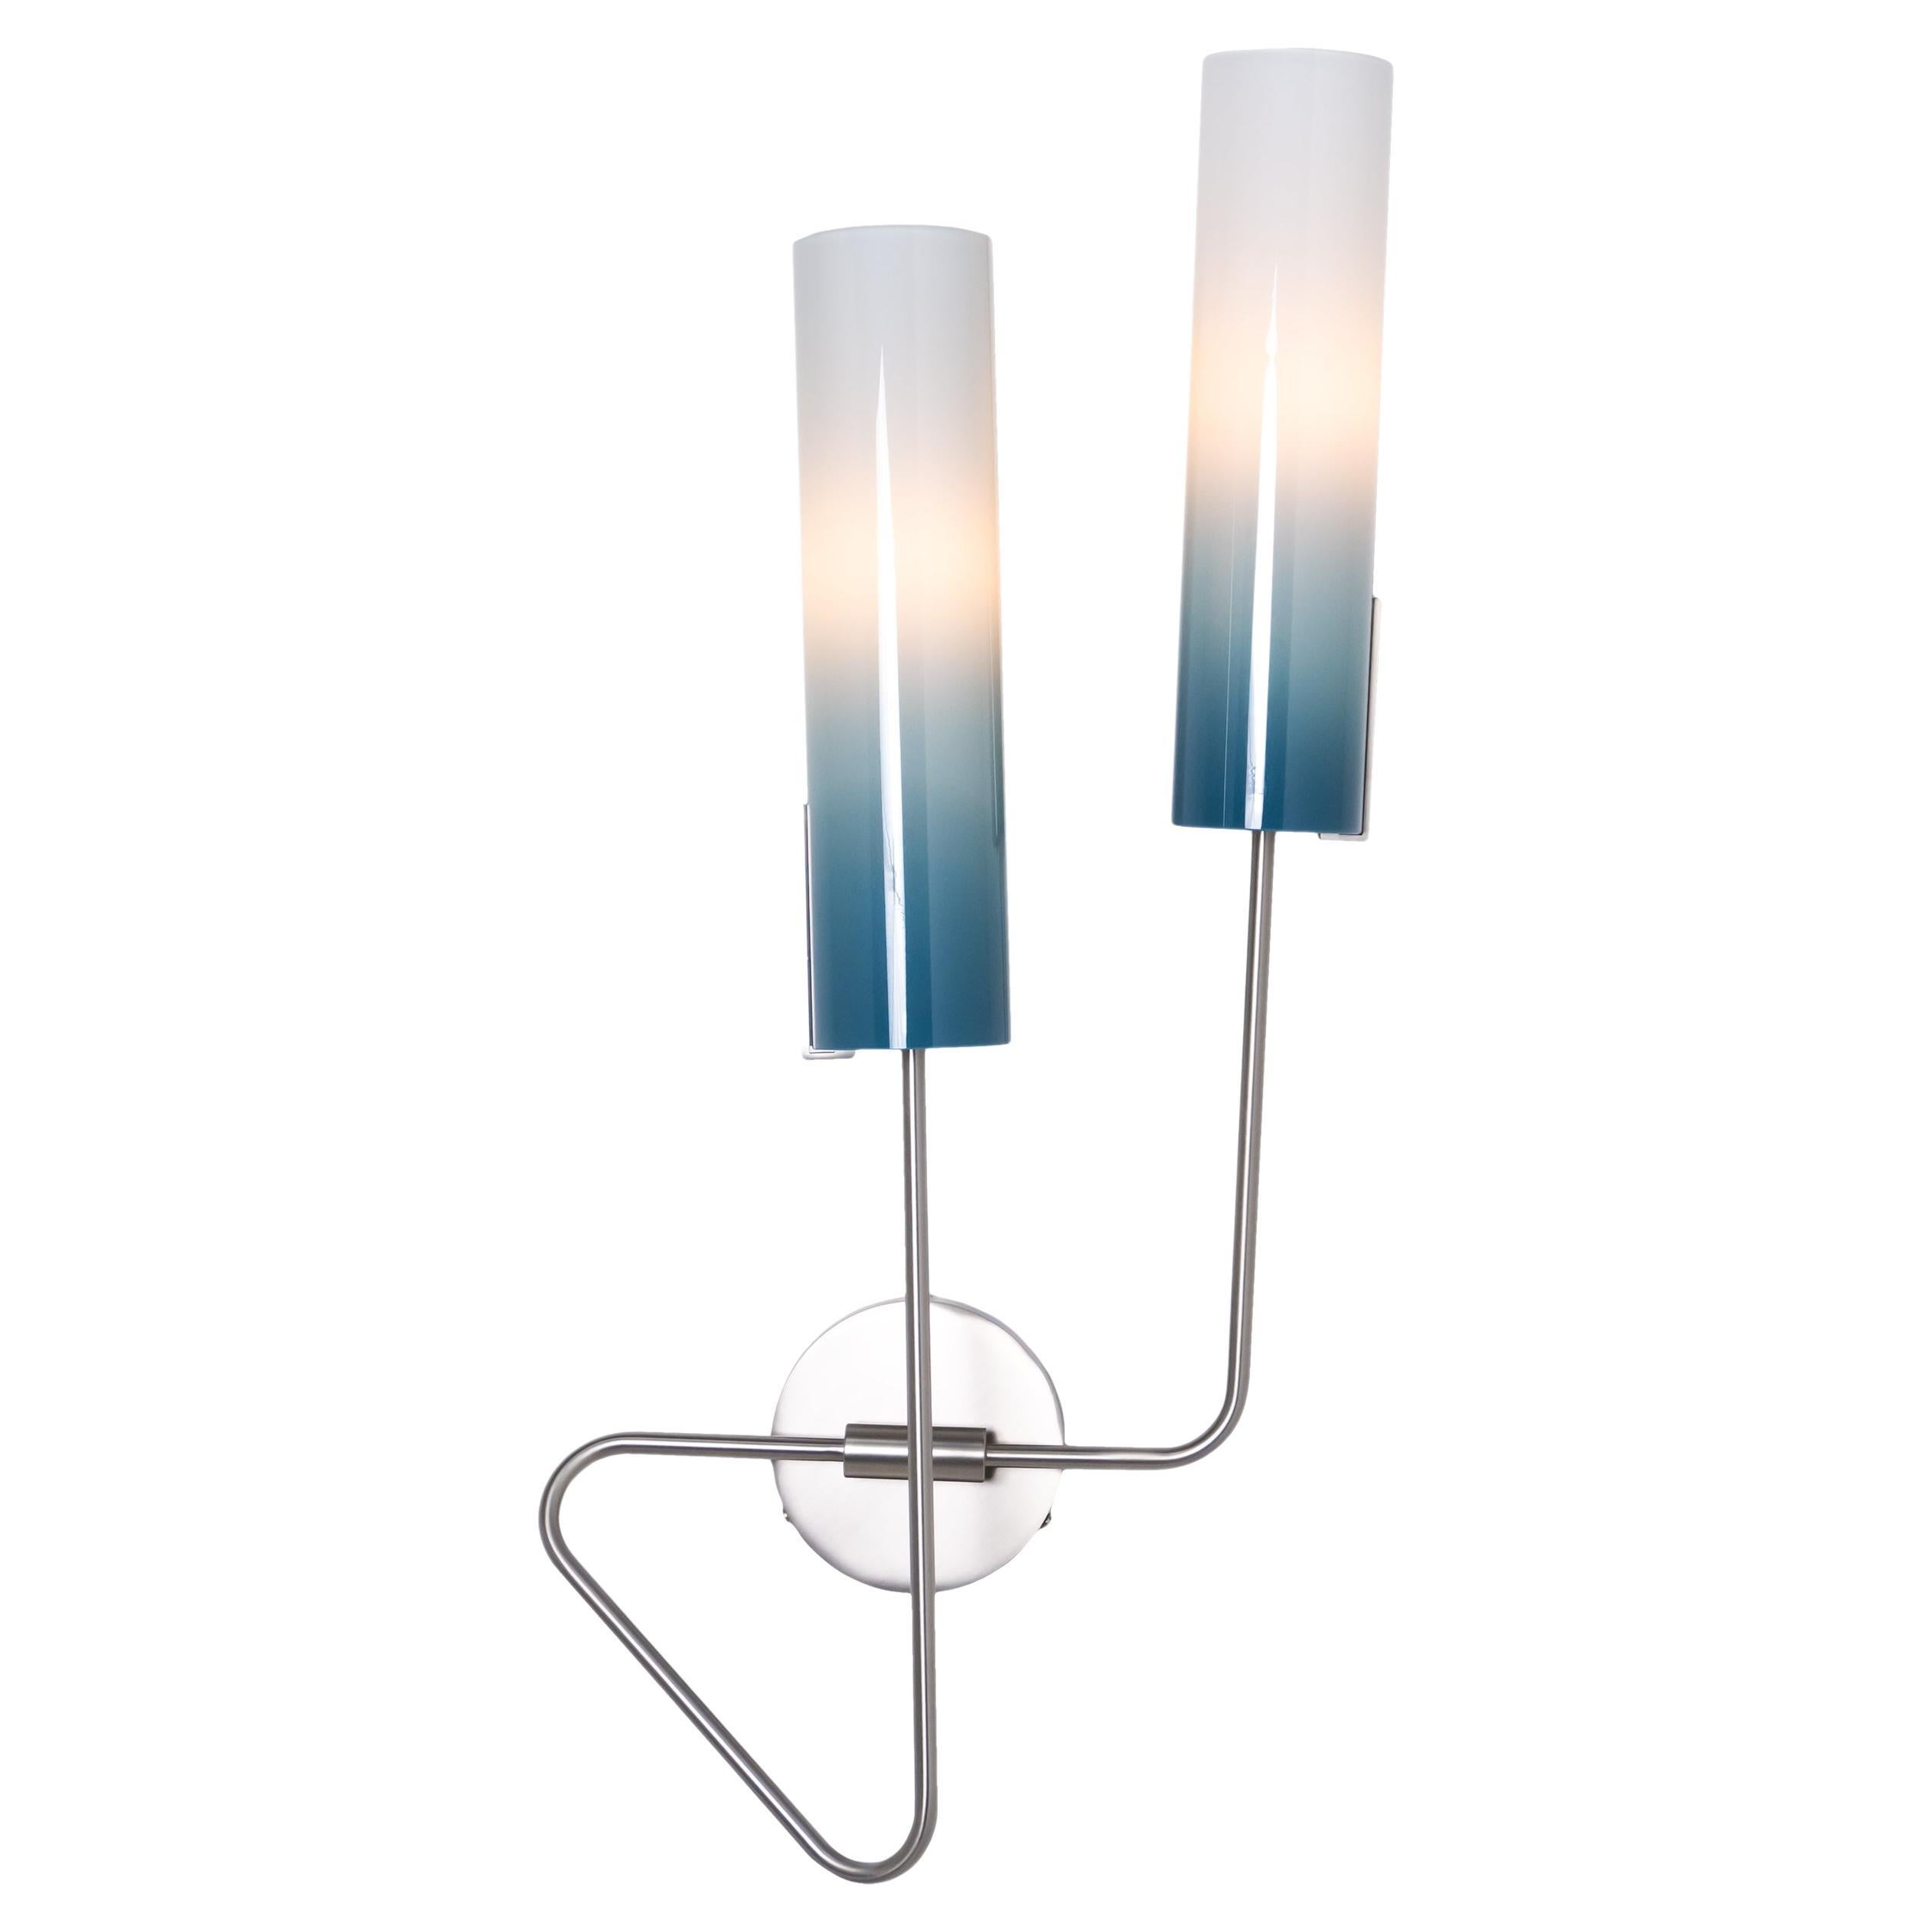 Continuum 01 Sconce: Satin Nickel/Slate Ombre Glass Shades by Avram Rusu Studio For Sale